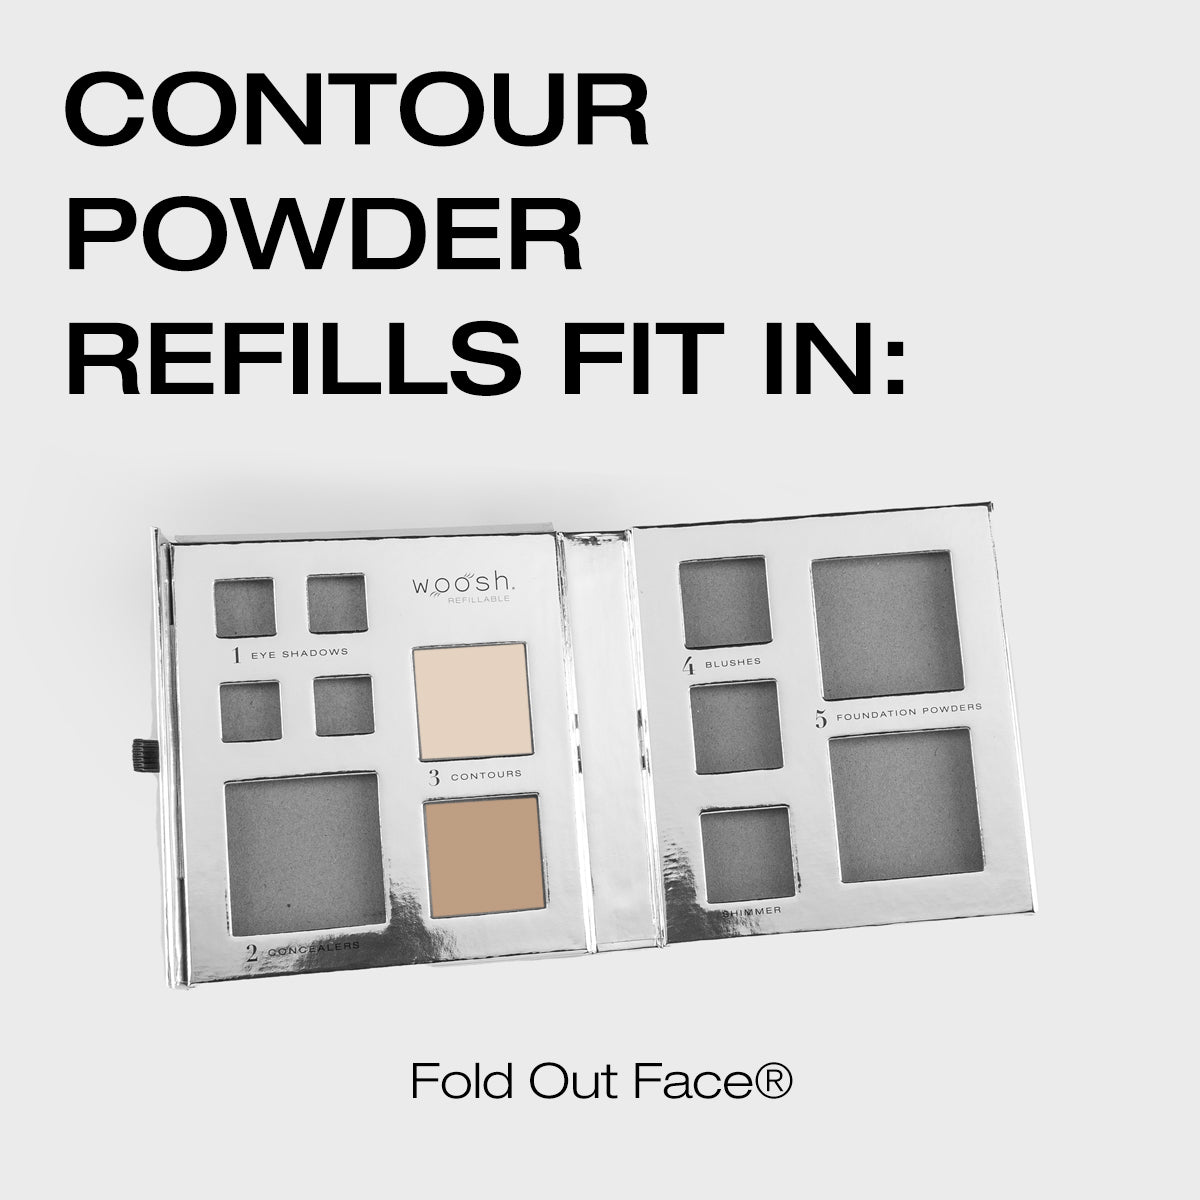 Contour powder refills fit in the fold out face demo